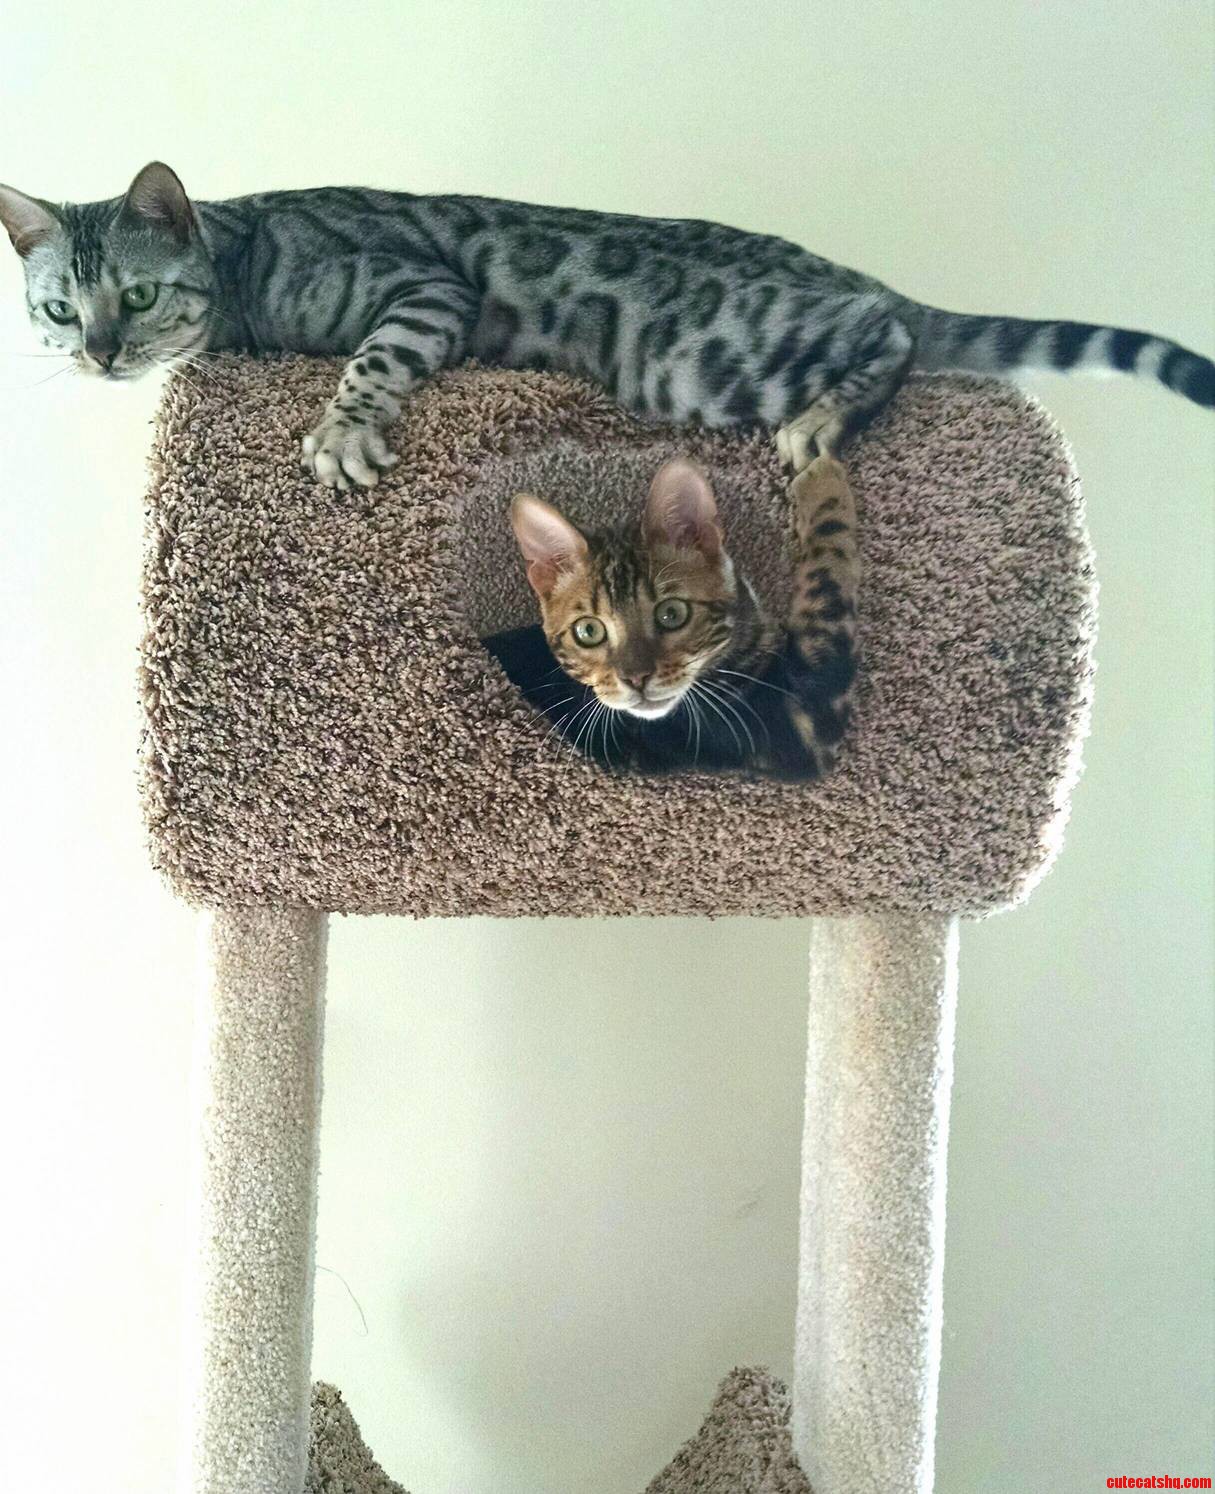 One bengal is fun. two bengals is a whole other story